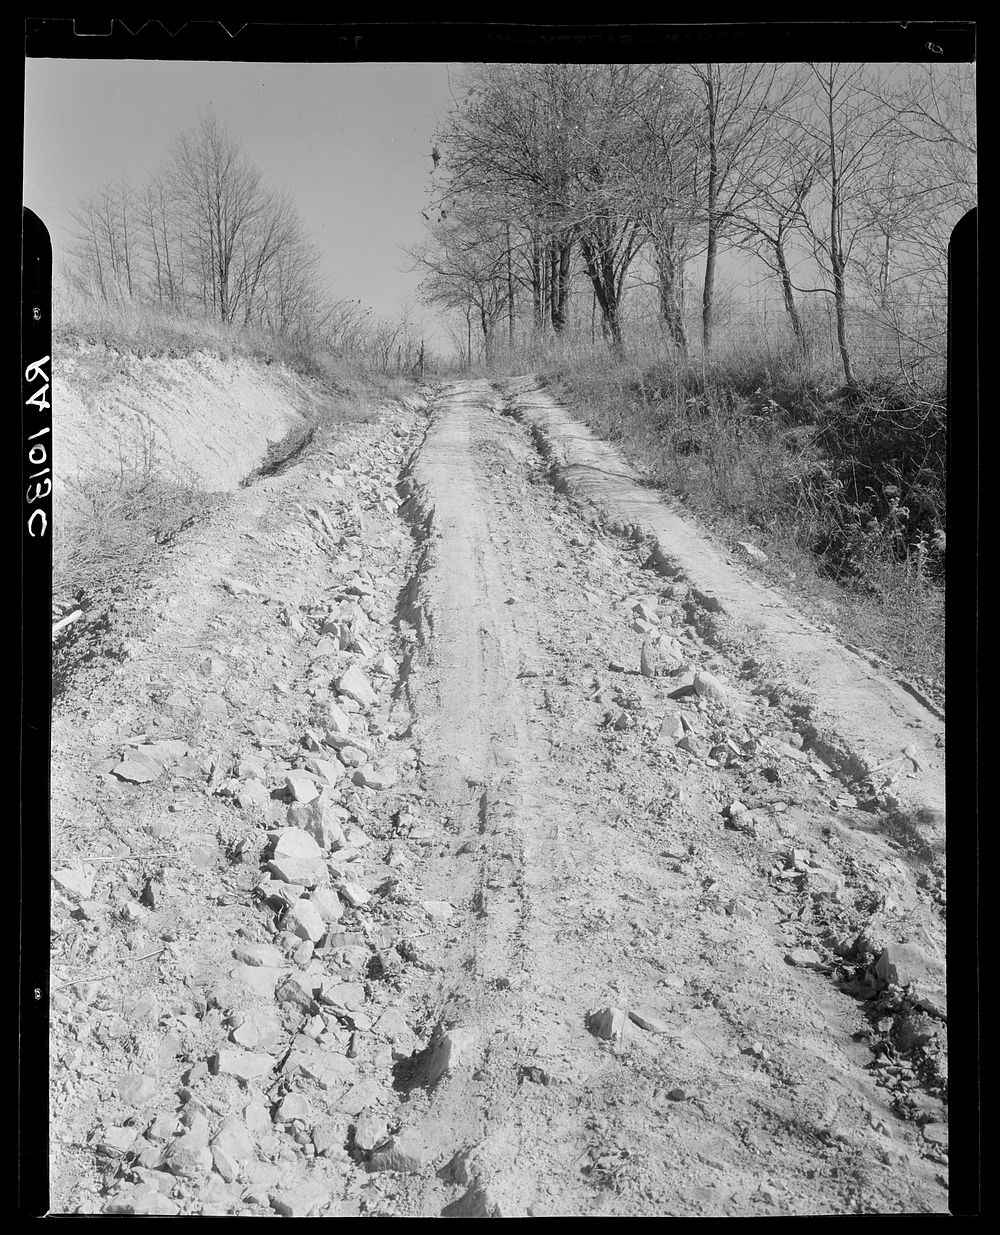 Poor country road typical of this area. Brown County, Indiana. Sourced from the Library of Congress.